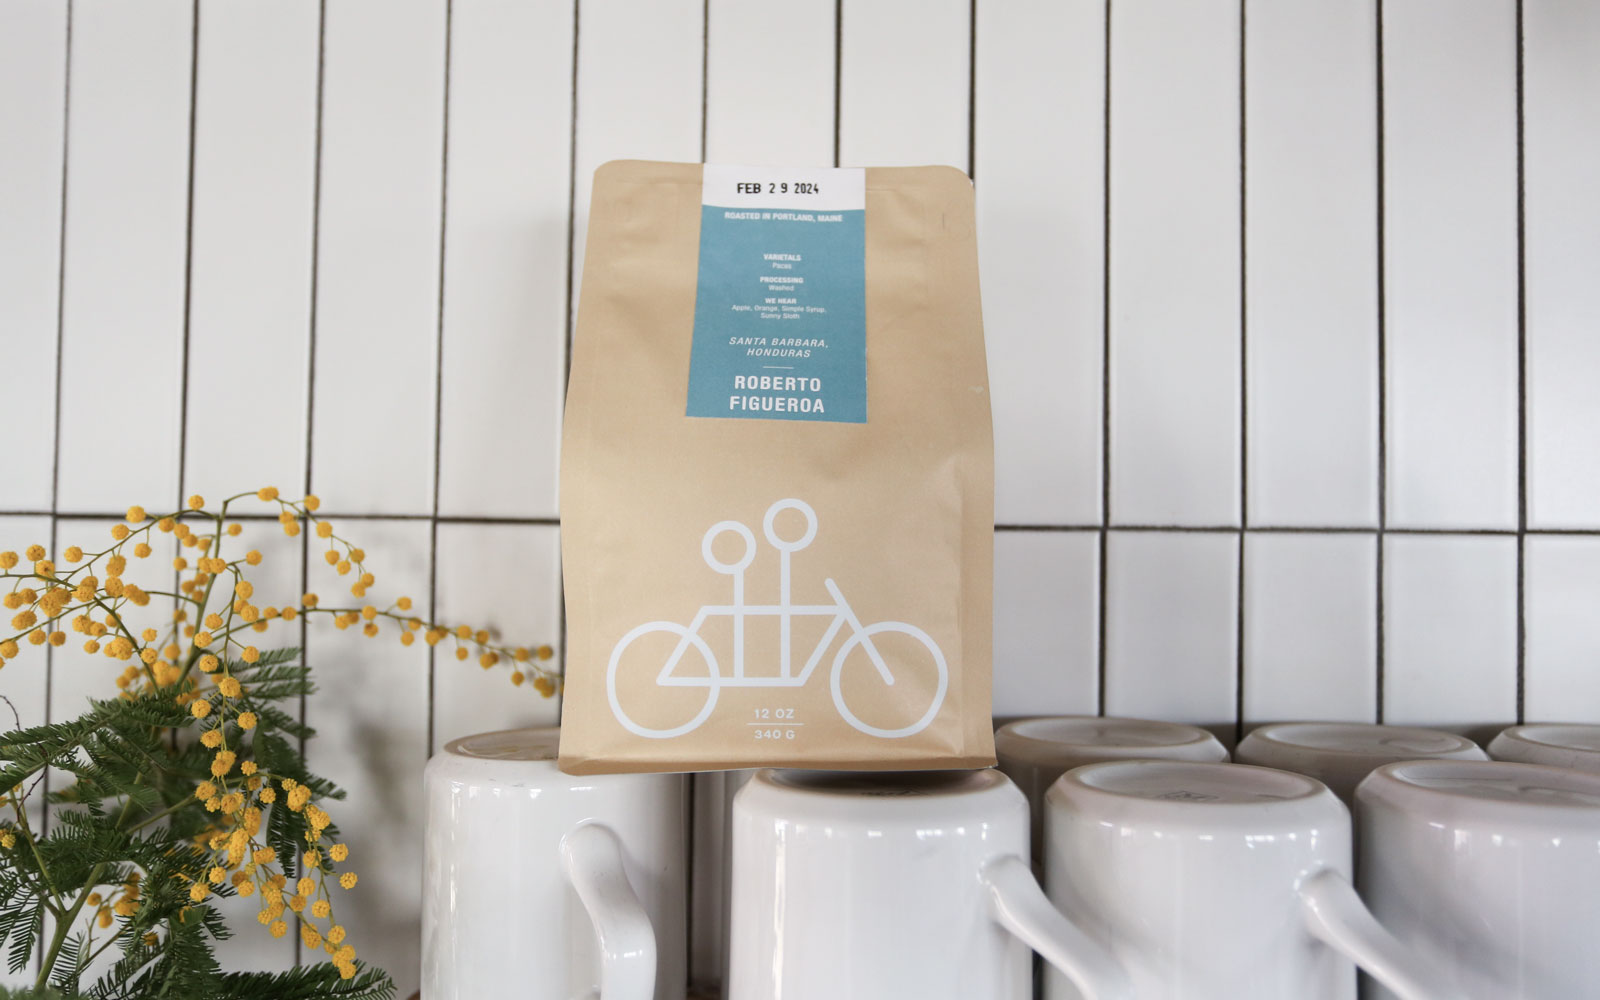 A coffee bag with a bicycle design stands on a white tiled countertop next to white mugs with yellow flowers in the background.